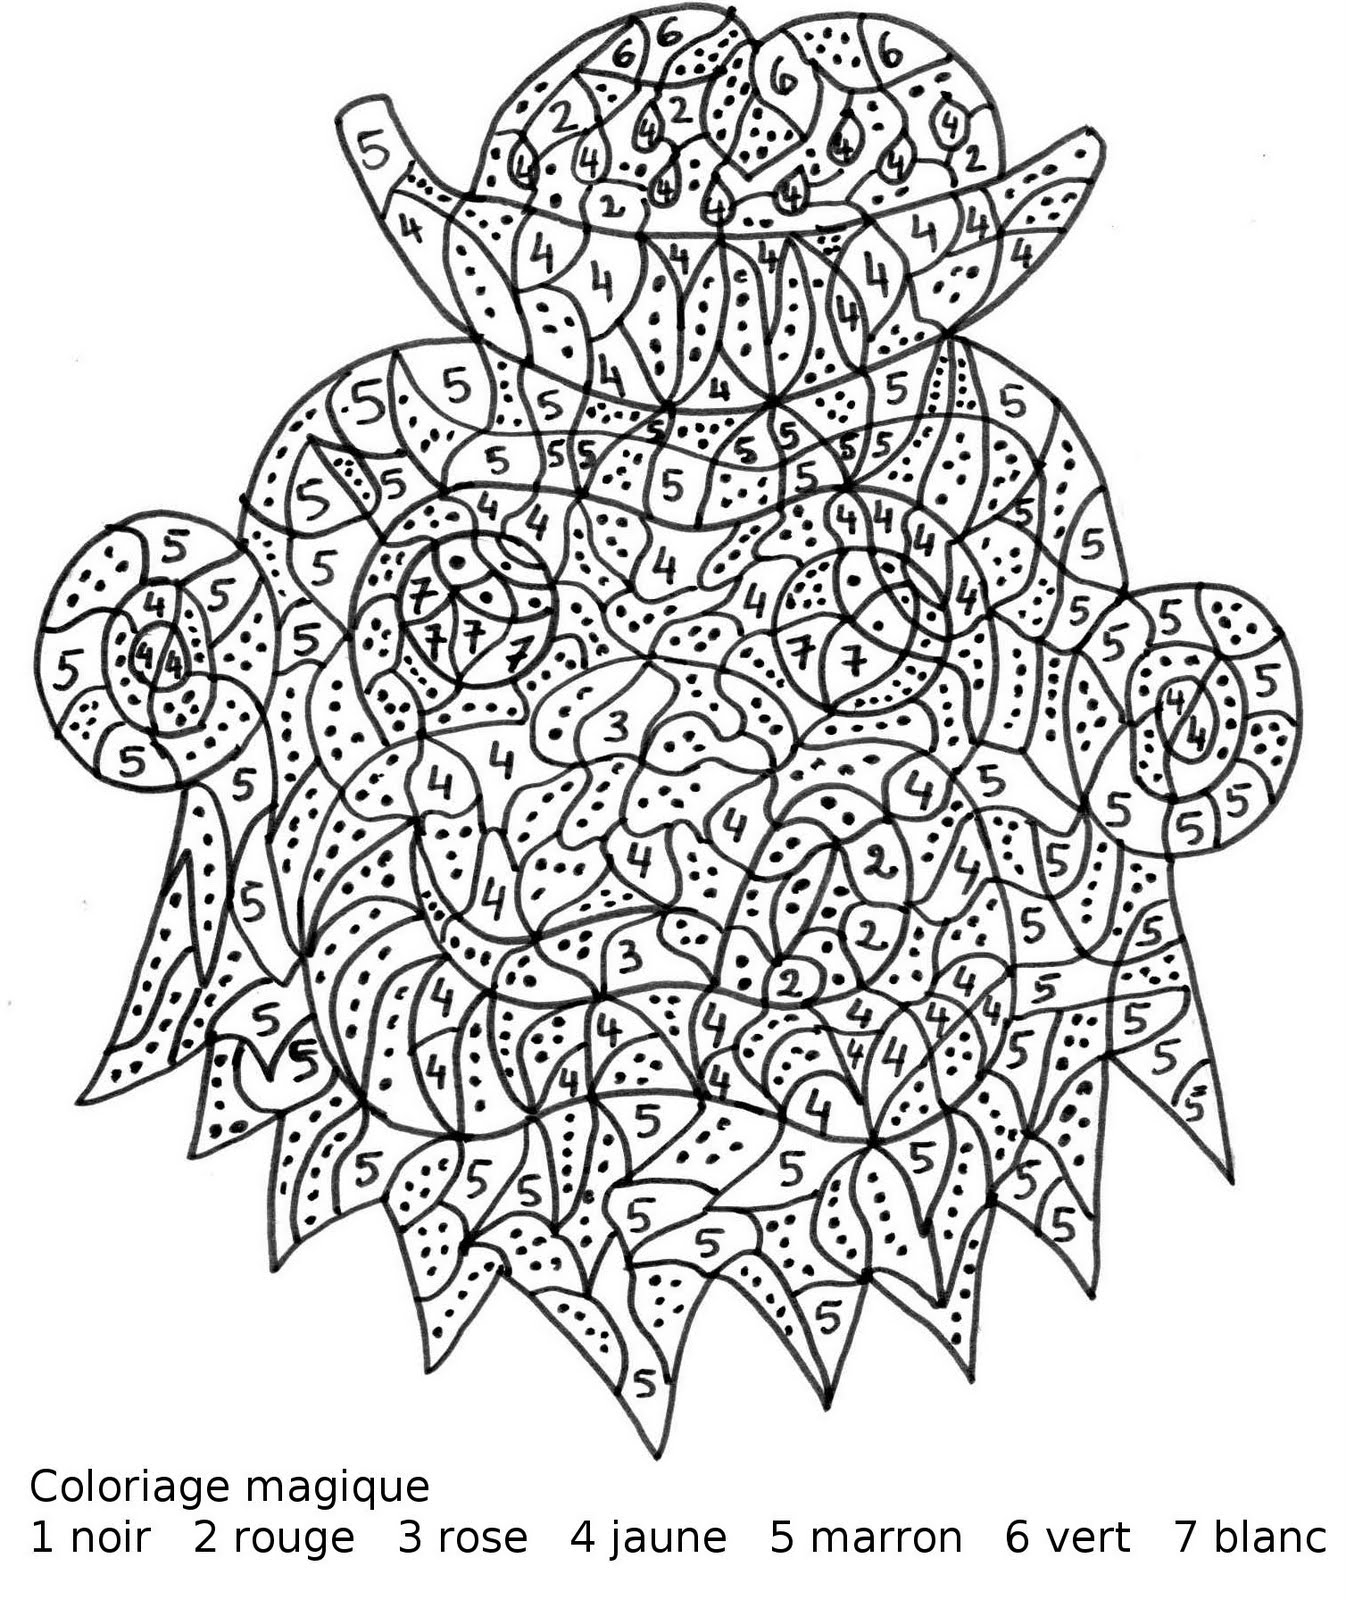 Coloring page: Magic coloring (Educational) #126162 - Free Printable Coloring Pages